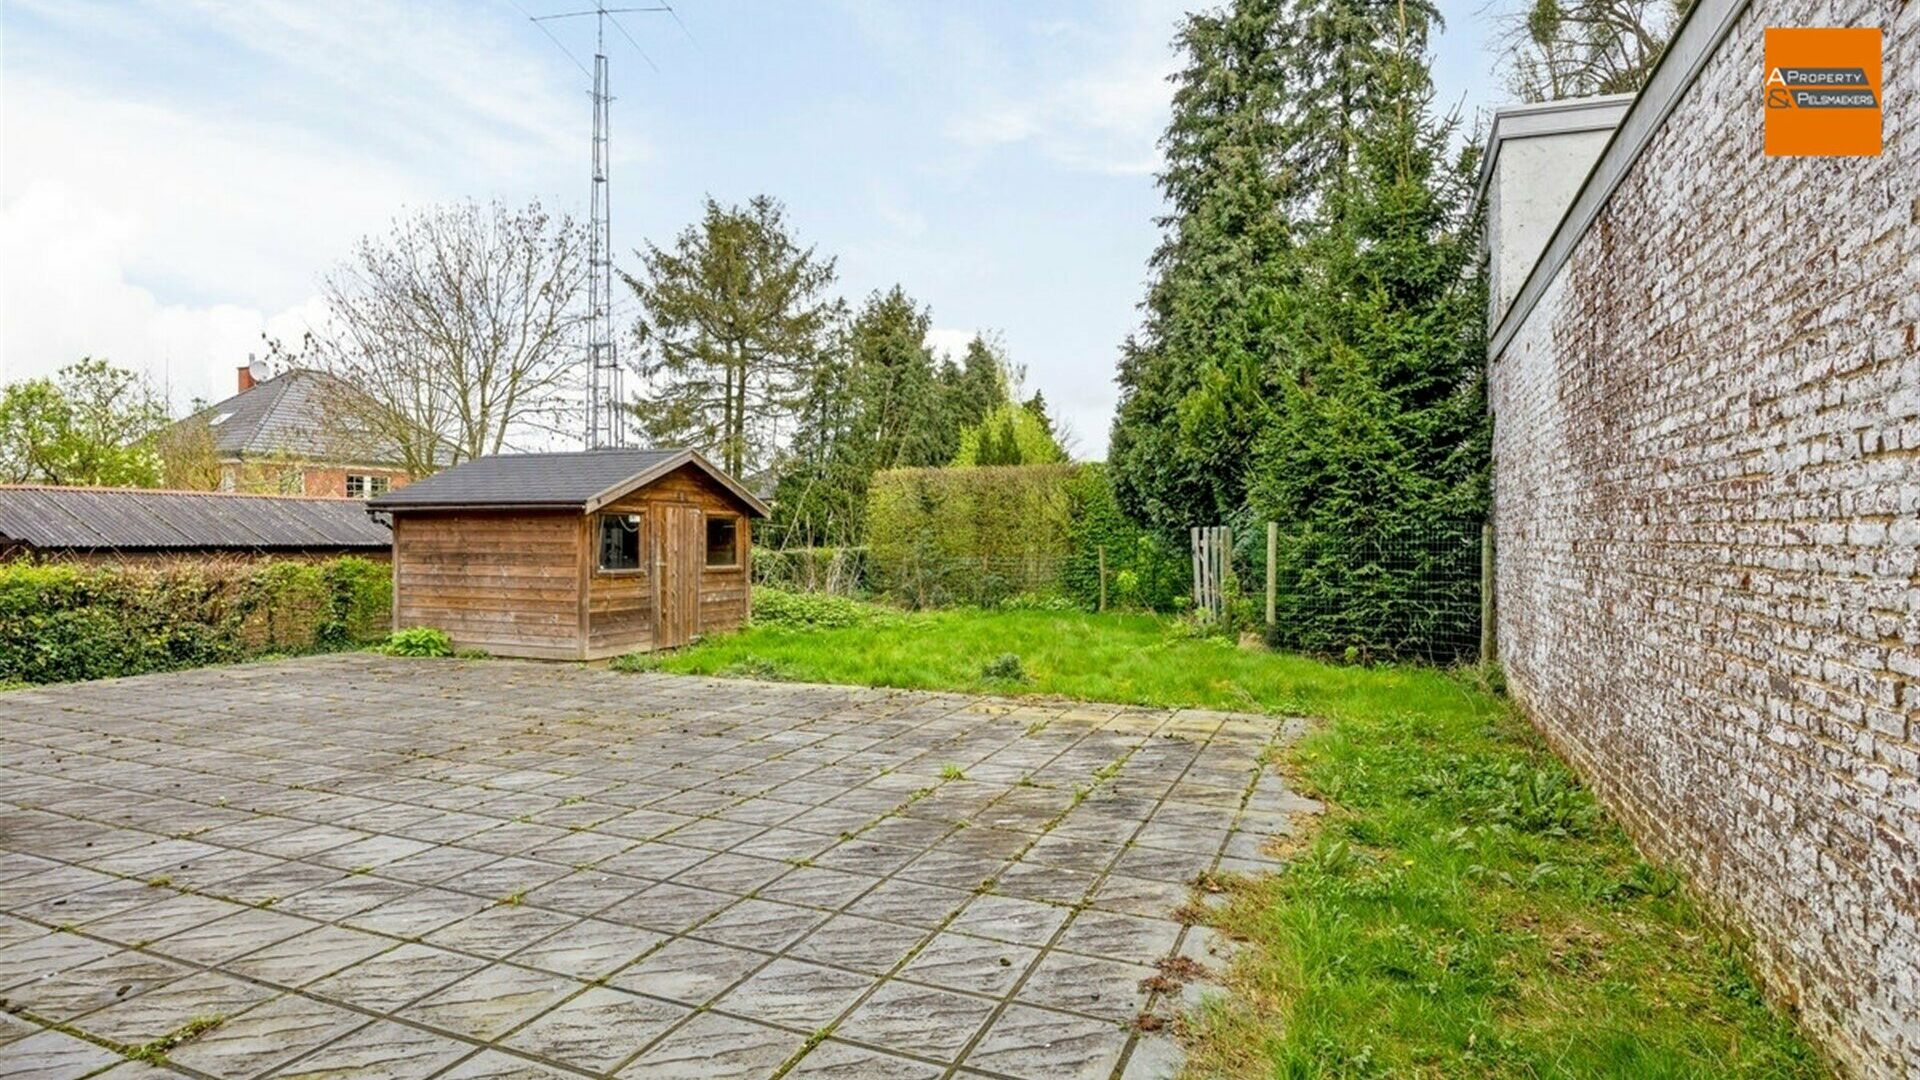 Property with character for sale in KORTENBERG